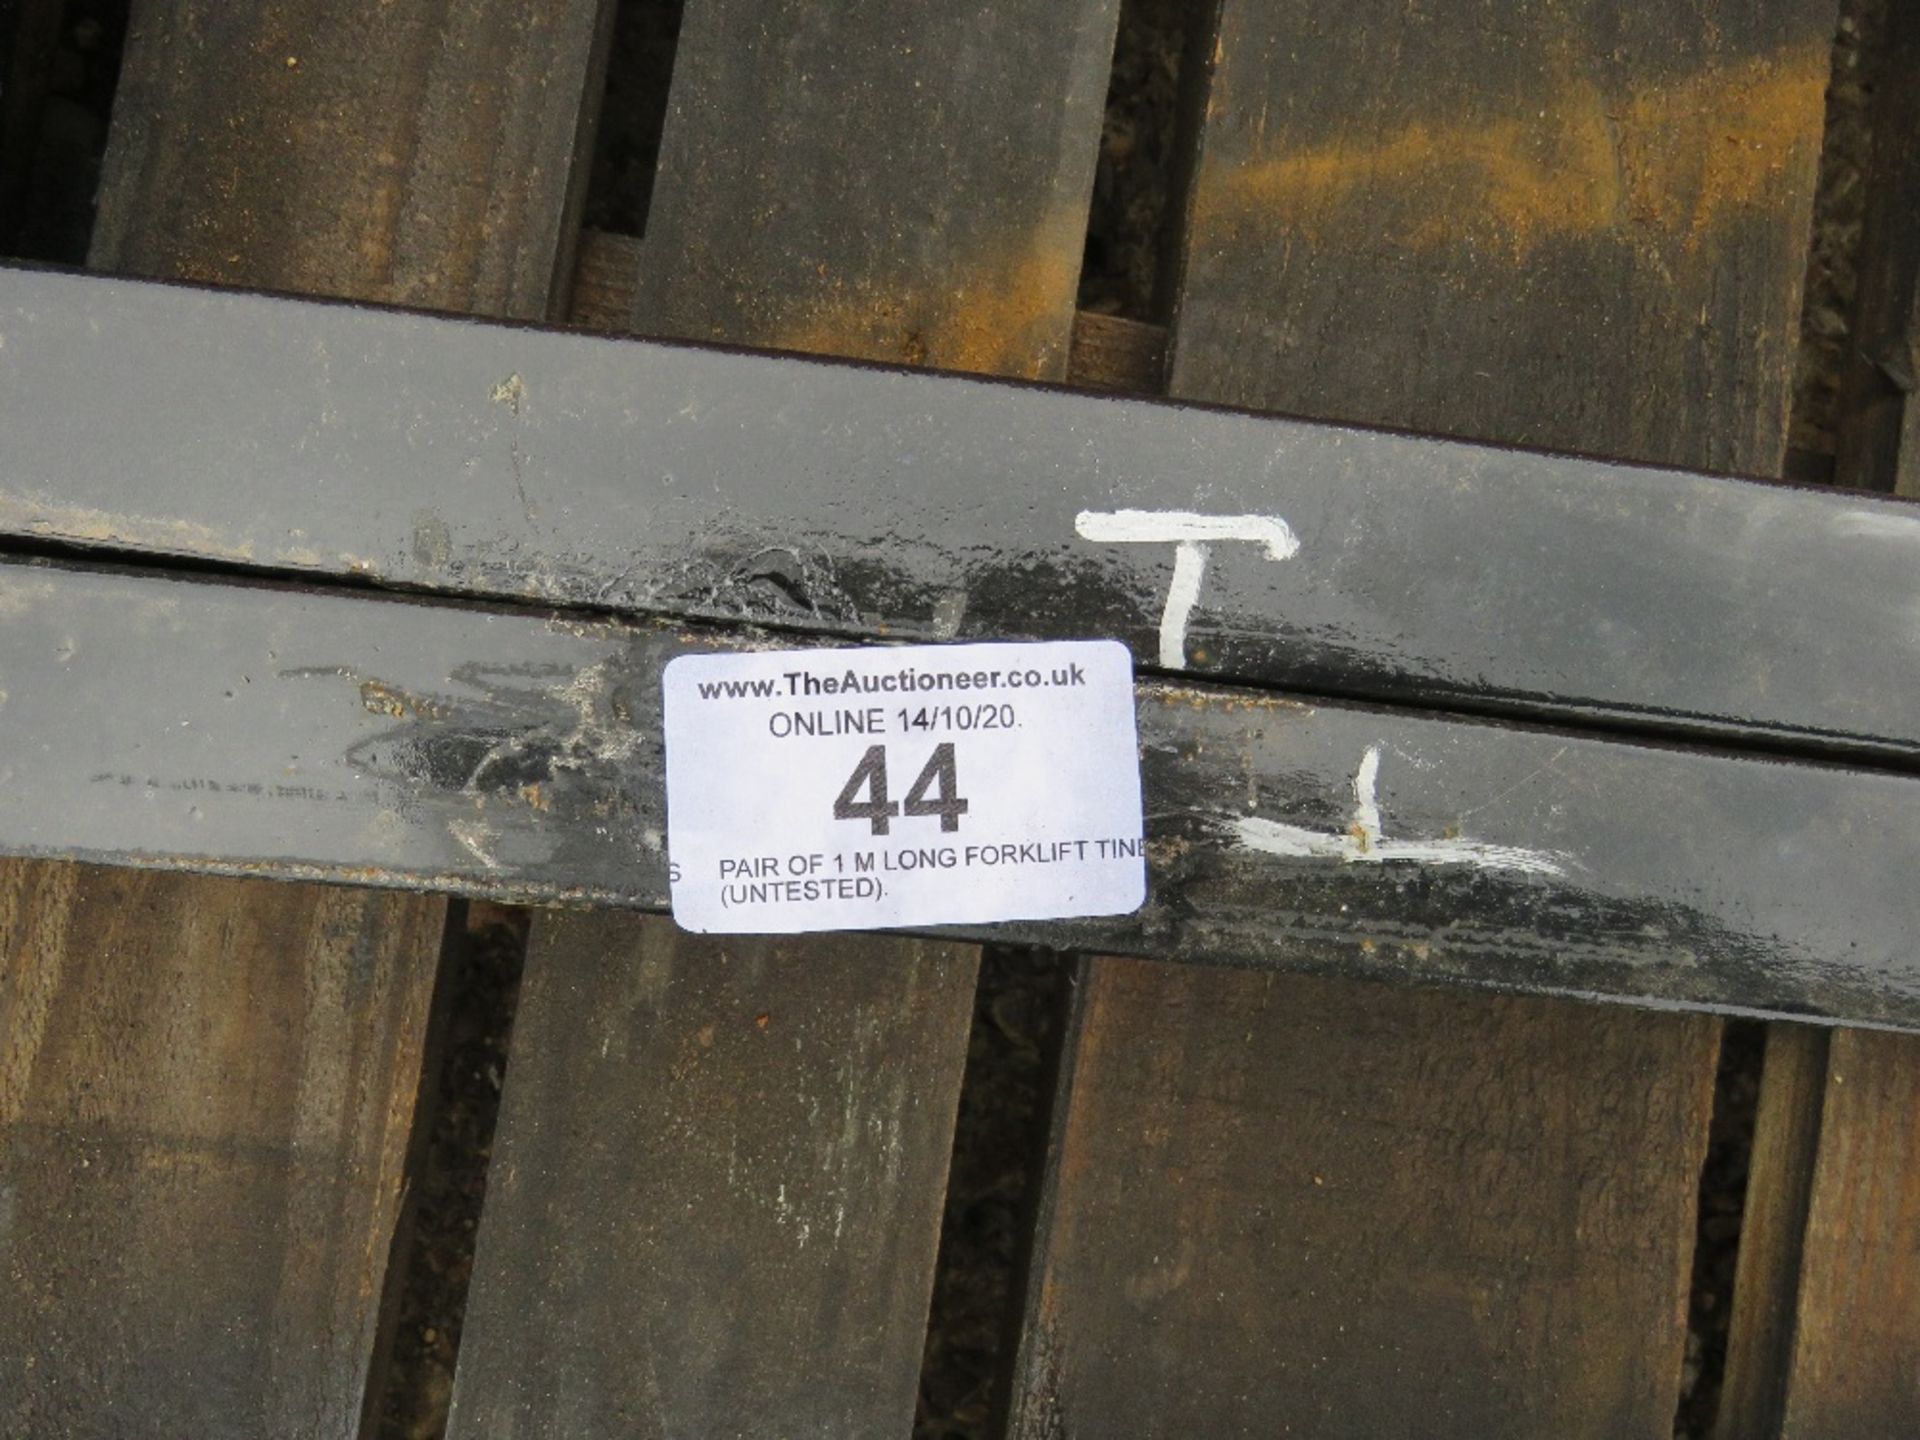 PAIR OF 1 M LONG FORKLIFT TINES (UNTESTED). - Image 2 of 2